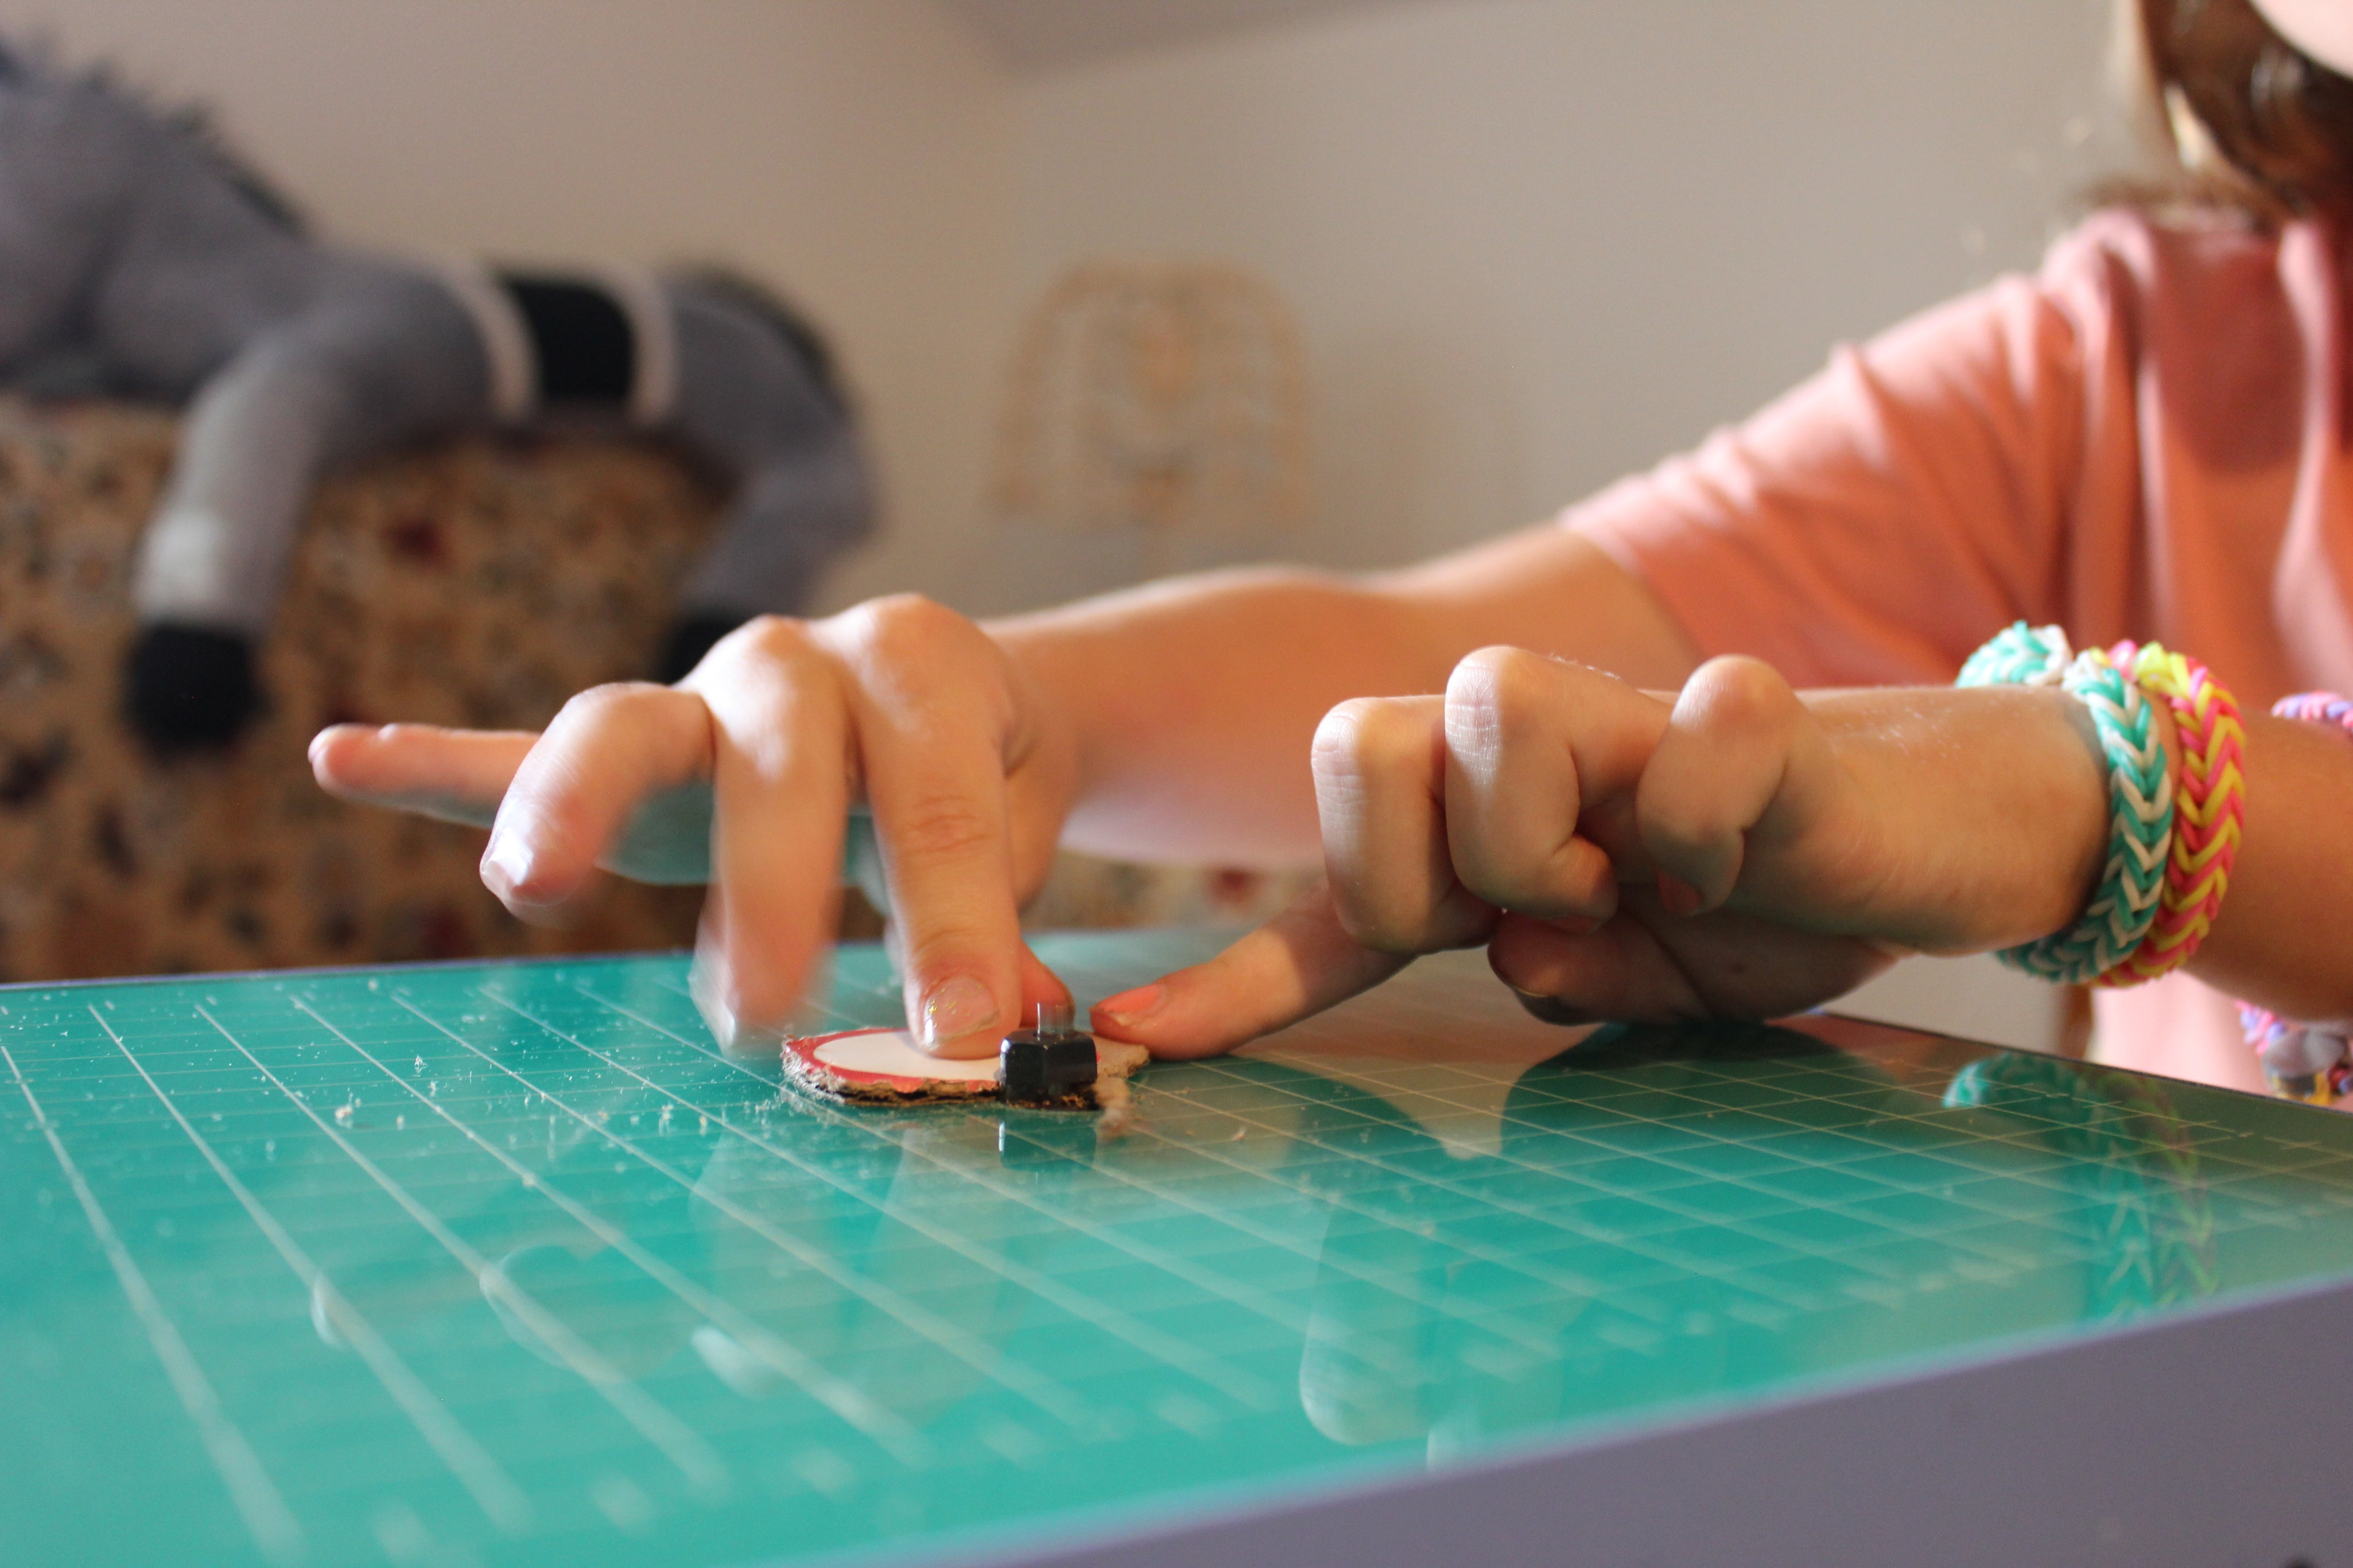 A Kickstarter Project We Love: InvenTable A Kid-Safe Power Tool For Cutting  Cardboard 